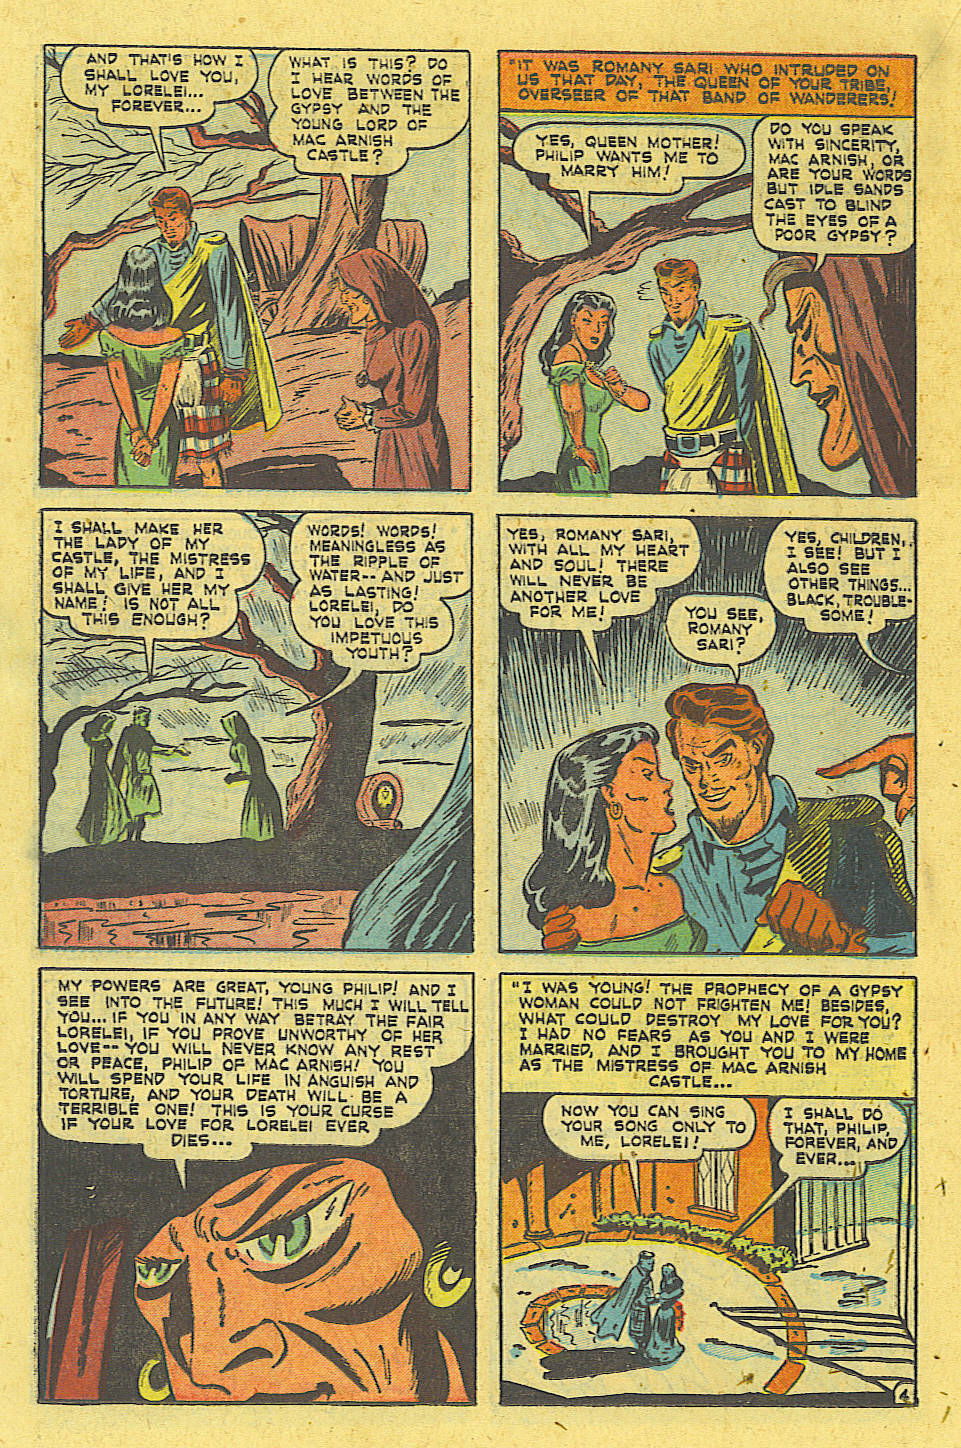 Marvel Tales (1949) 95 Page 13